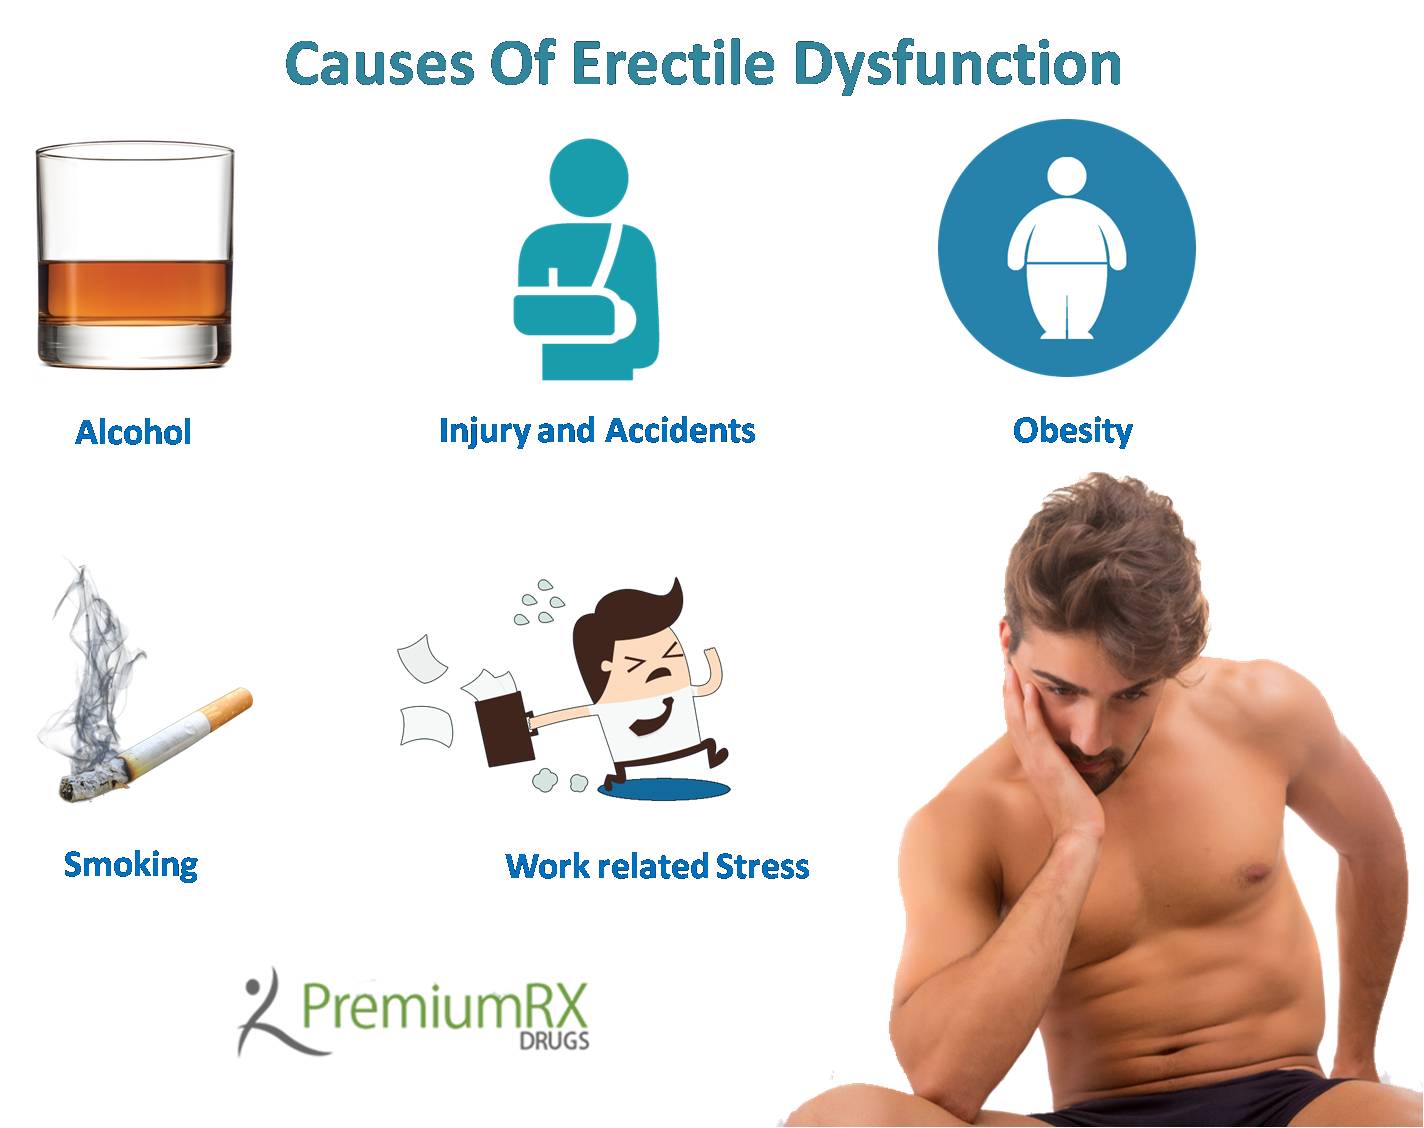 10 Causes Of Erectile Dysfunction You Probably Didn’t Know About!